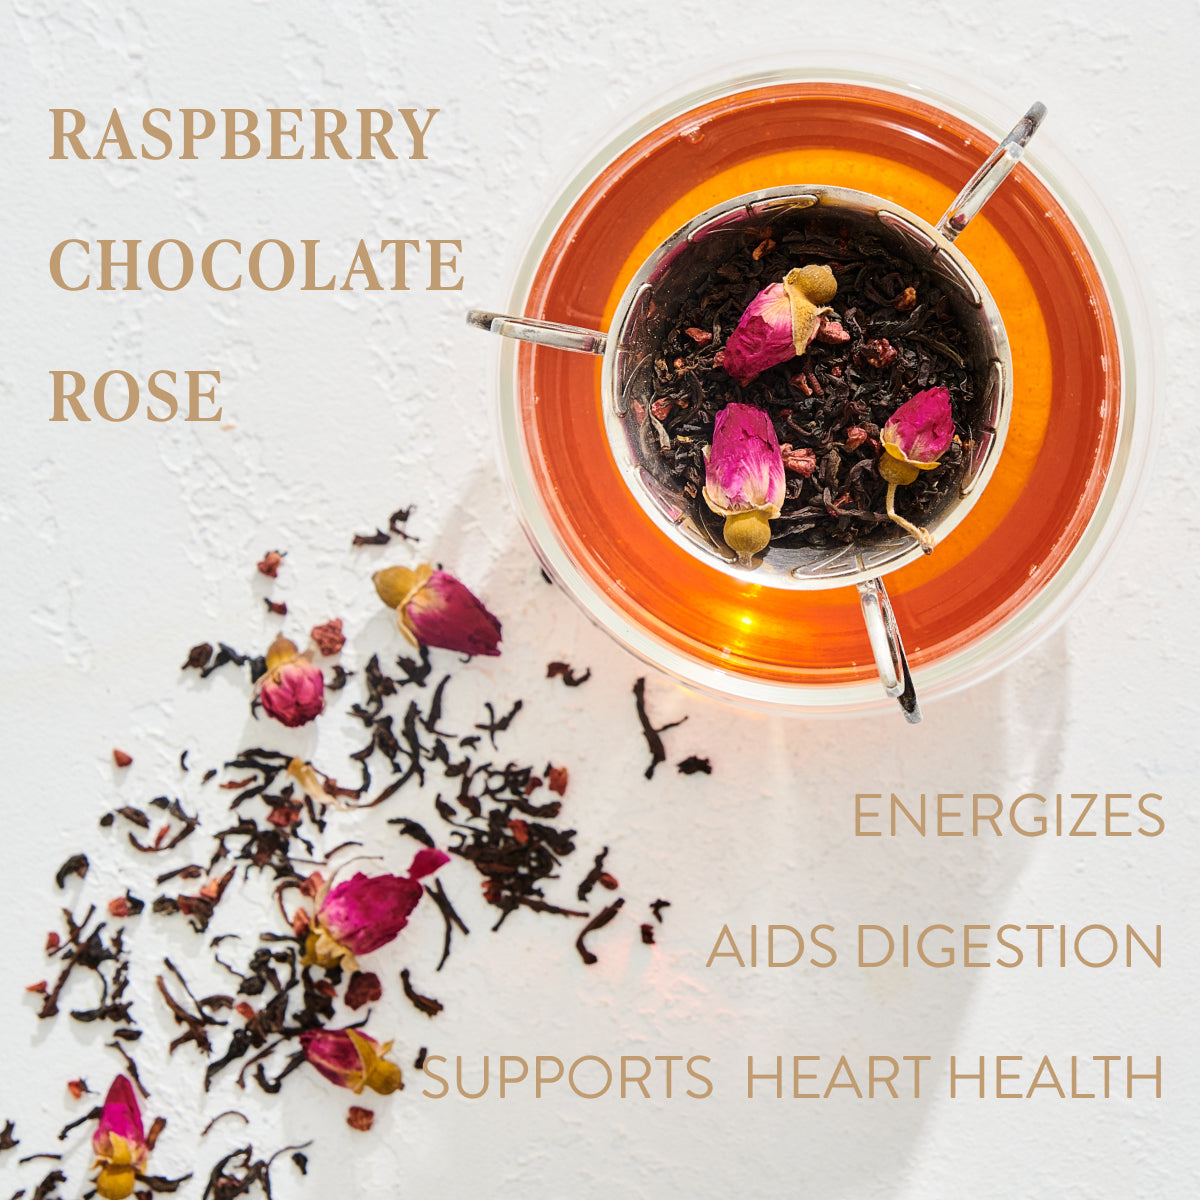 A glass cup of tea with loose leaf tea leaves, rose petals, and a tea infuser sits on a white surface. The tea is a rosy-brown color. Text around the image reads: &quot;SOULMATE: CHOCOLATE-RASPBERRY-ROSE BLACK TEA FOR FINDING &amp; CELEBRATING LOVE,&quot; &quot;ENERGIZES,&quot; &quot;AIDS DIGESTION,&quot; and &quot;SUPPORTS HEART HEALTH.&quot; Experience the magic hour with organic tea bliss from Magic Hour.